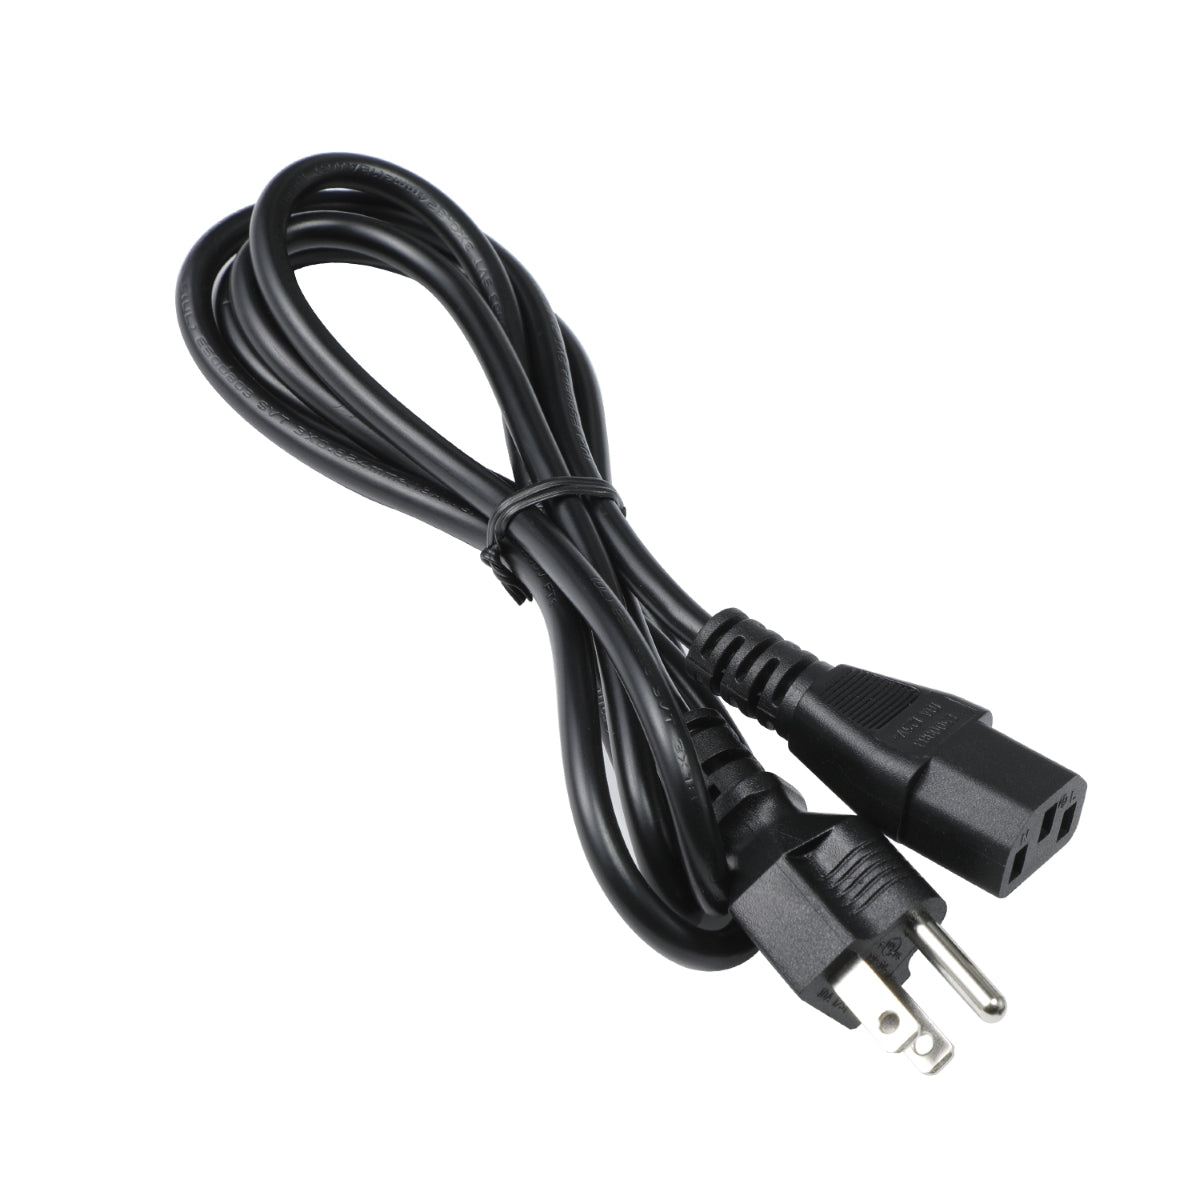 Power Cord for HP Pavilion 550-227c Computer.